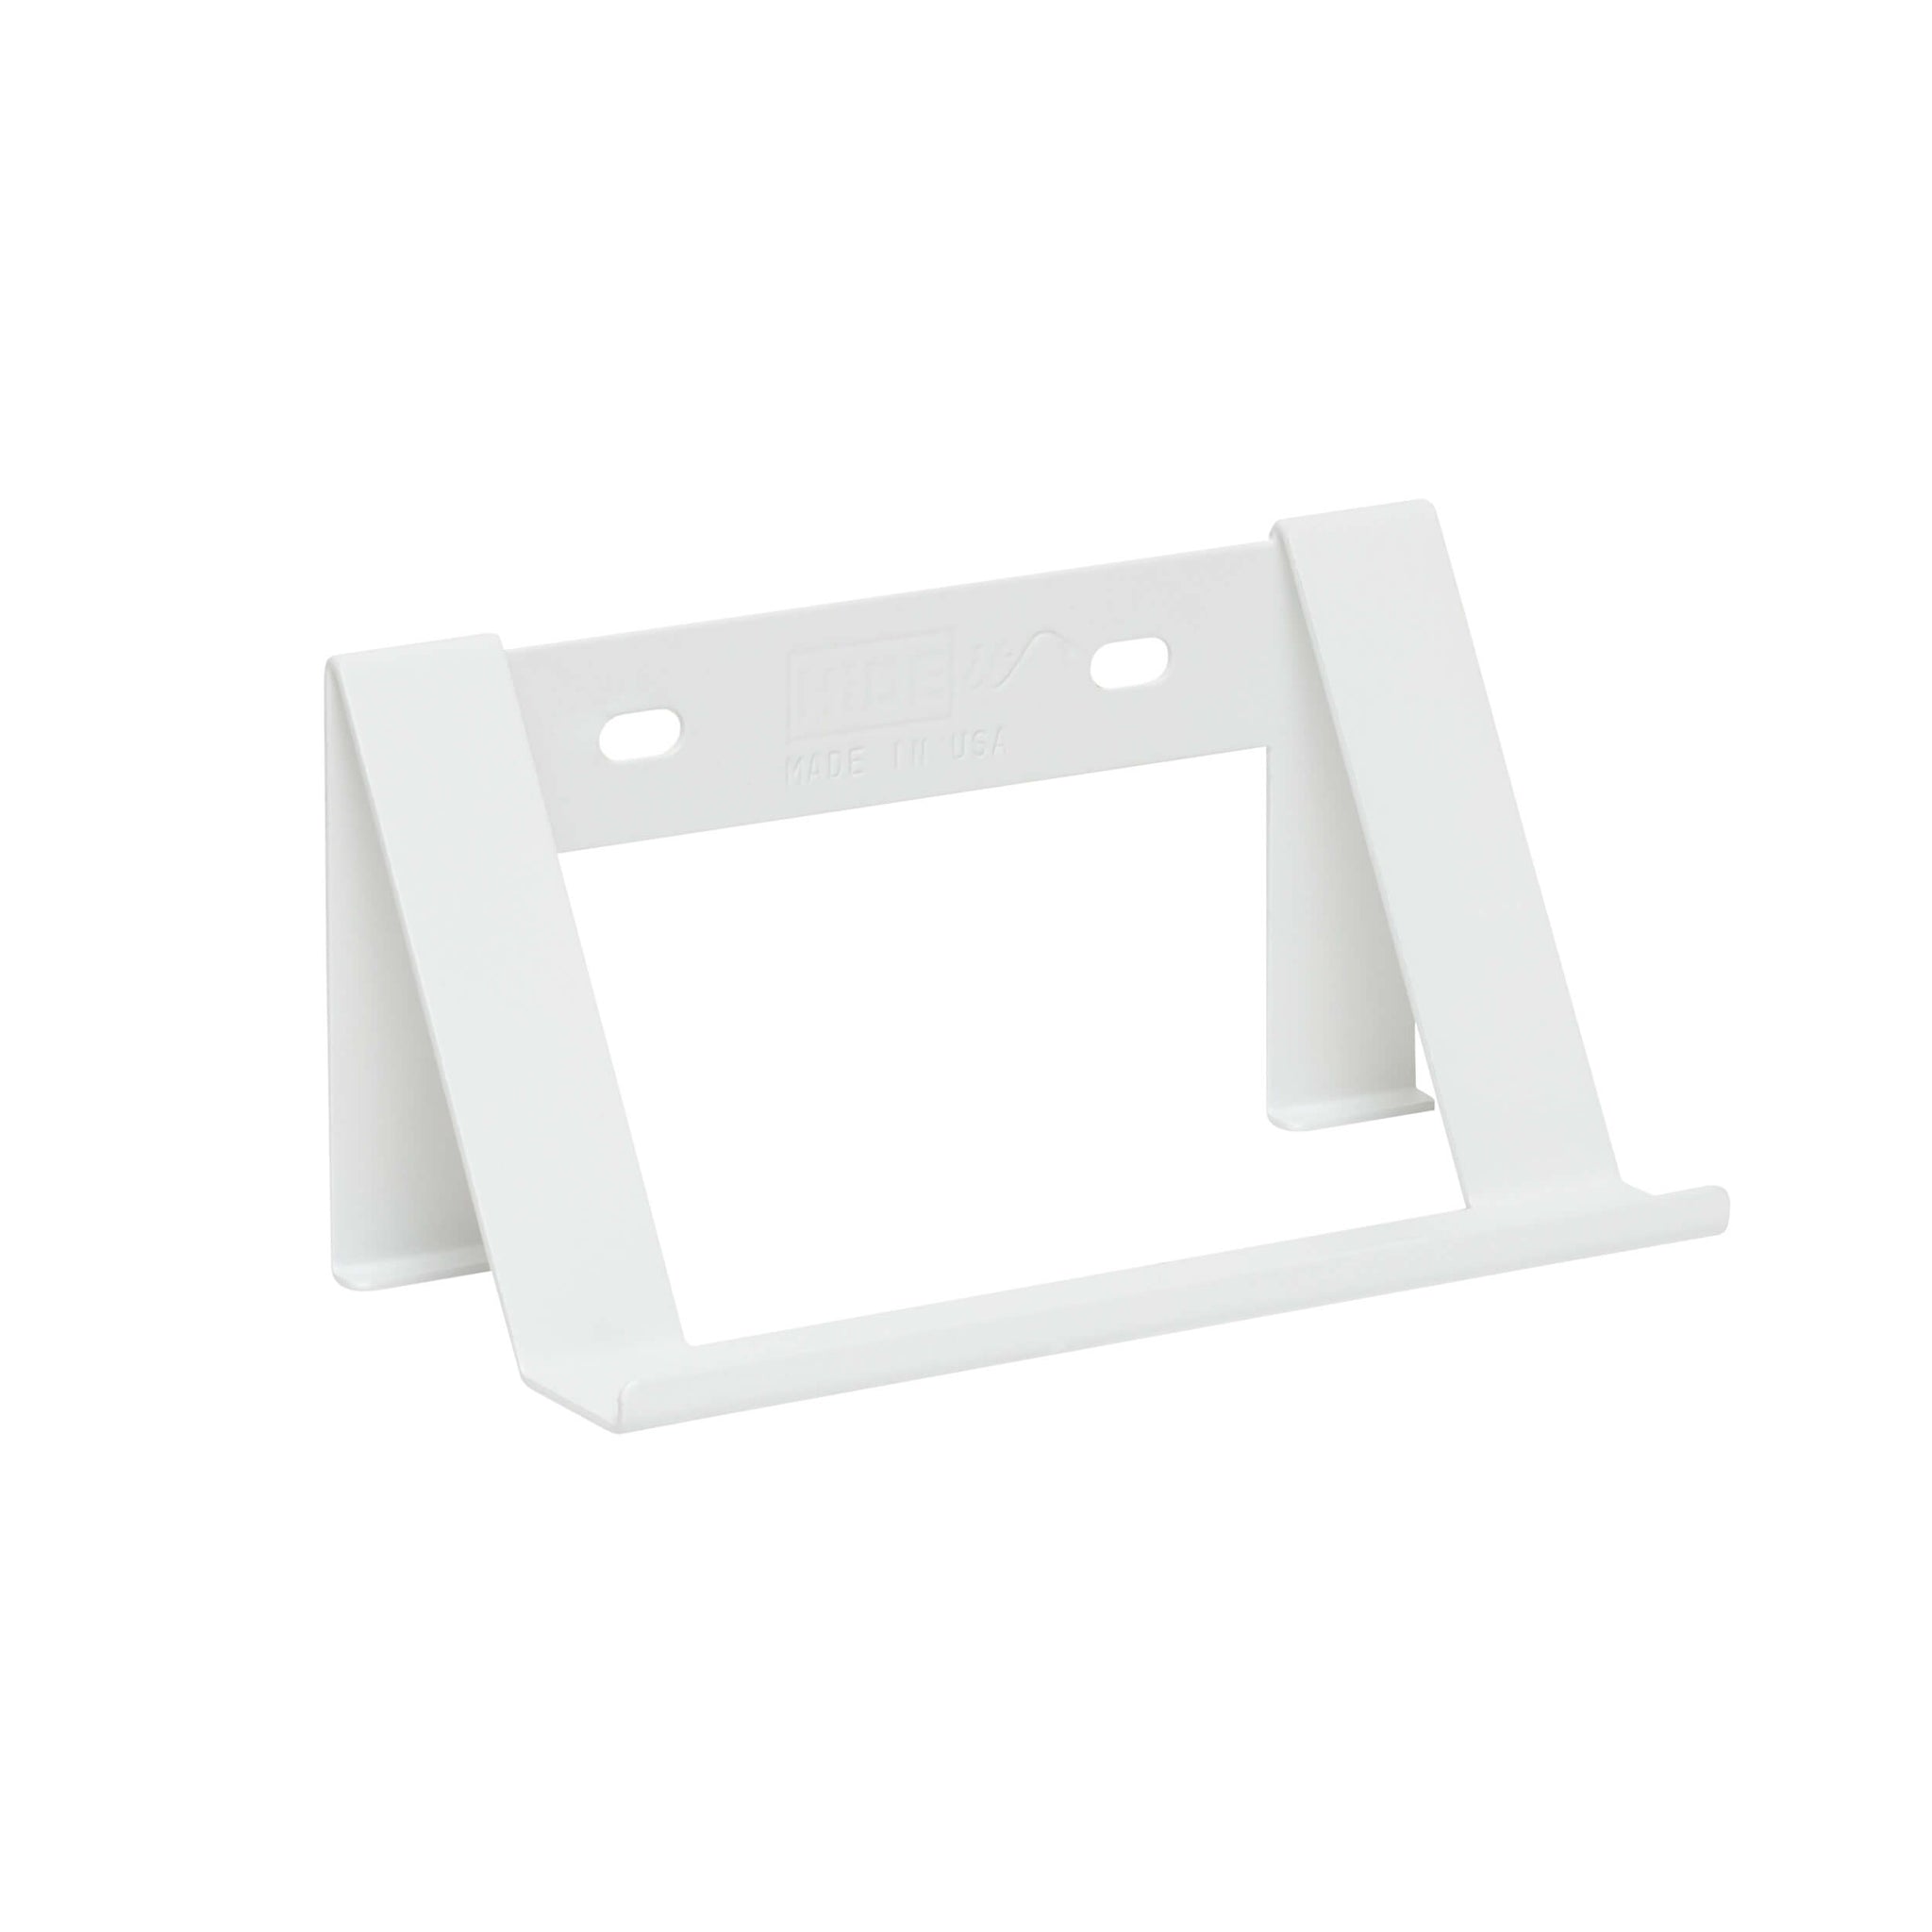 HIDEit Keyboard Mount is available in white to blend seamlessly with pegboards.